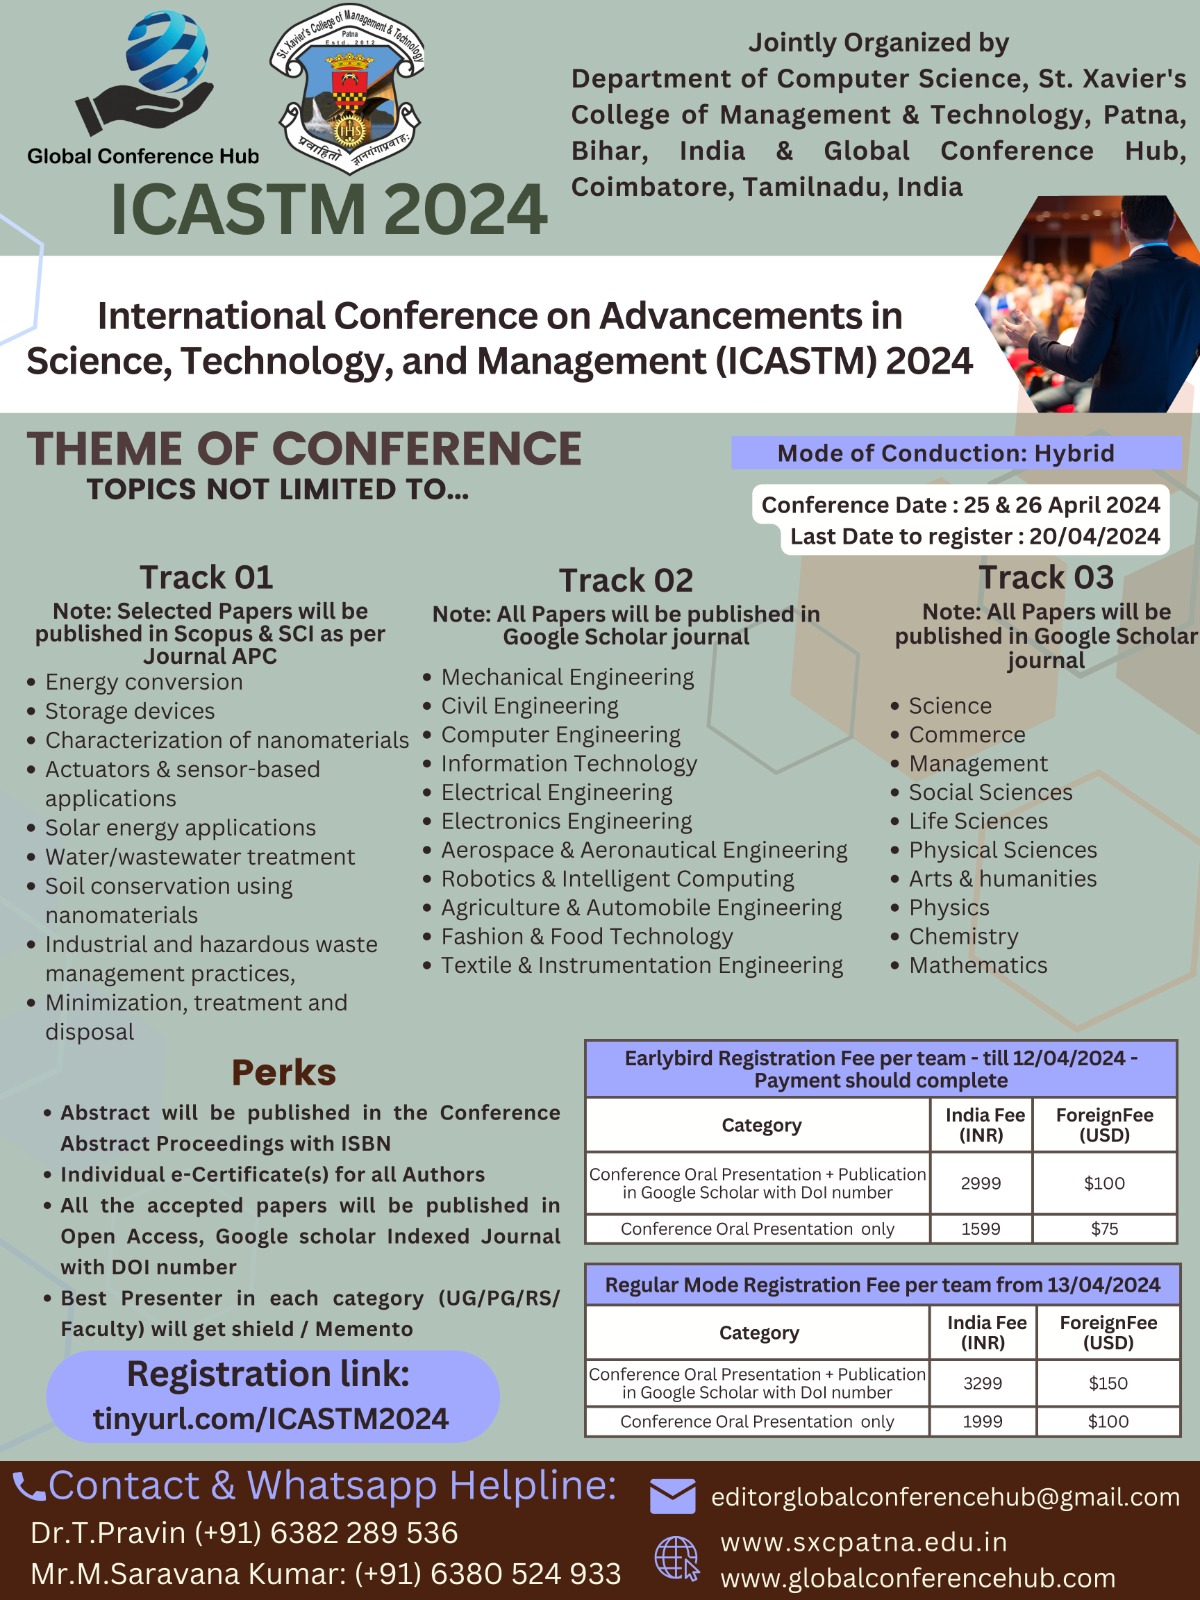 International Conference on Advancements in Science, Technology and Management ICASTM - 2024